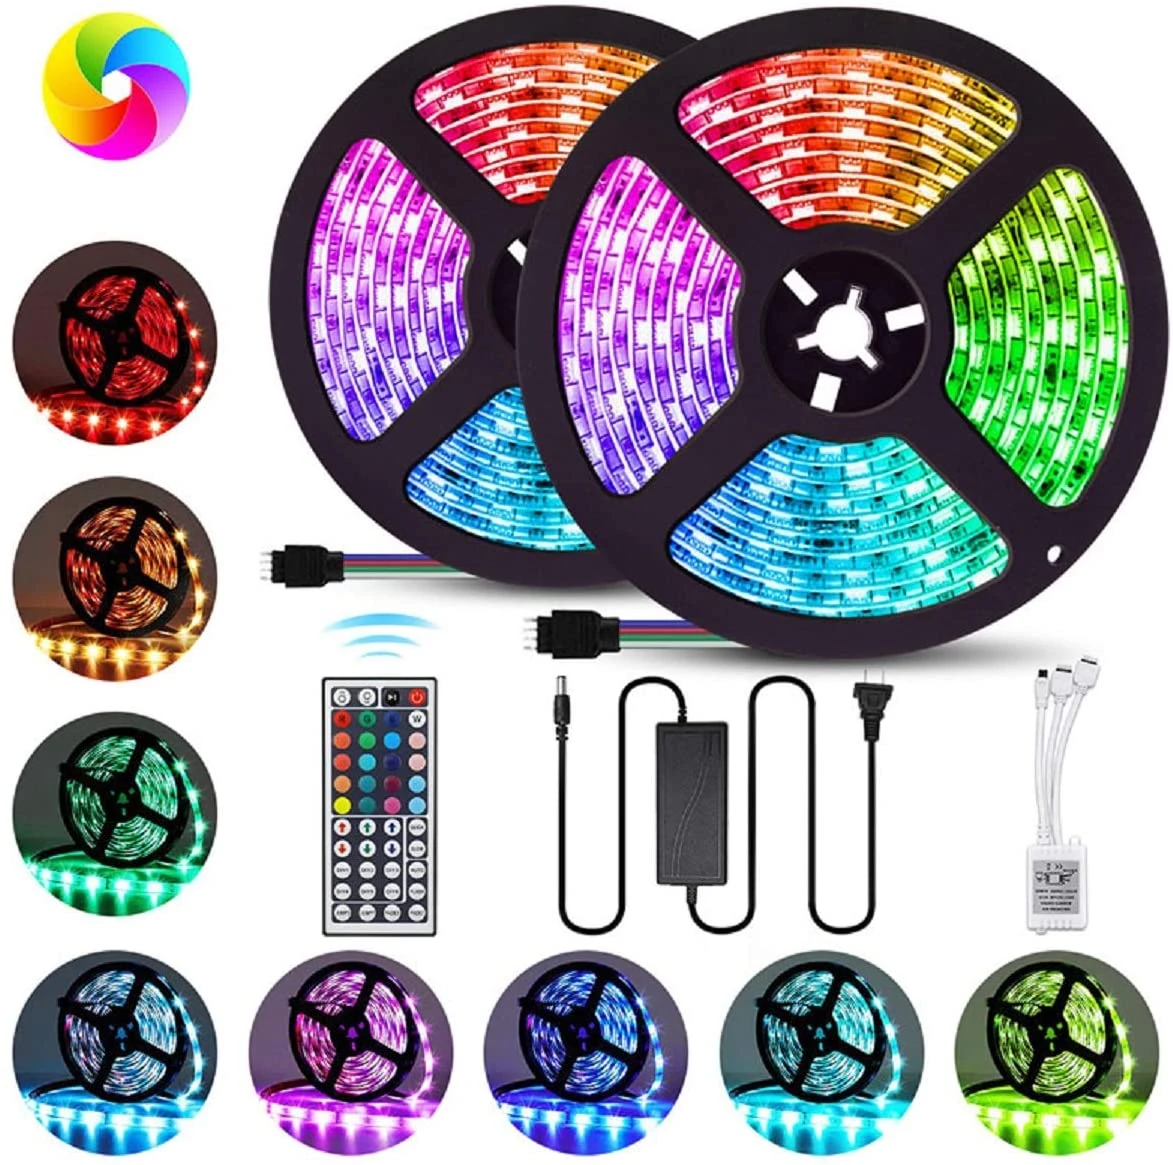 DIY Flexible 10M Waterproof Both Indoor And Outdoor 5050 RGB LED Strip Light With 44 Key Remote Controller